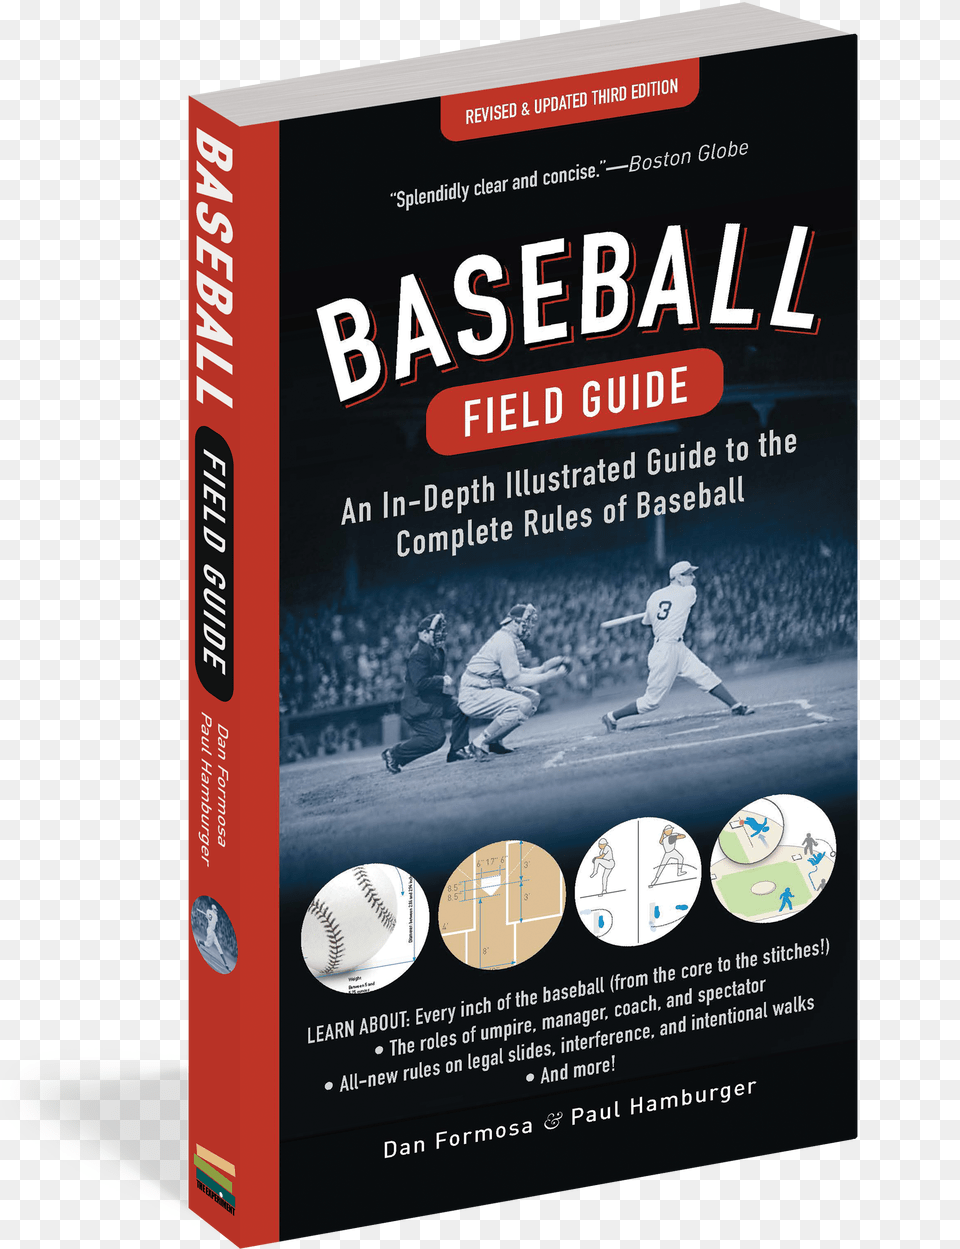 Baseball Field Guide Full Size Pngkit Baseball Field An Illustrated Guide To The Complete Rules Of Baseball Free Png Download